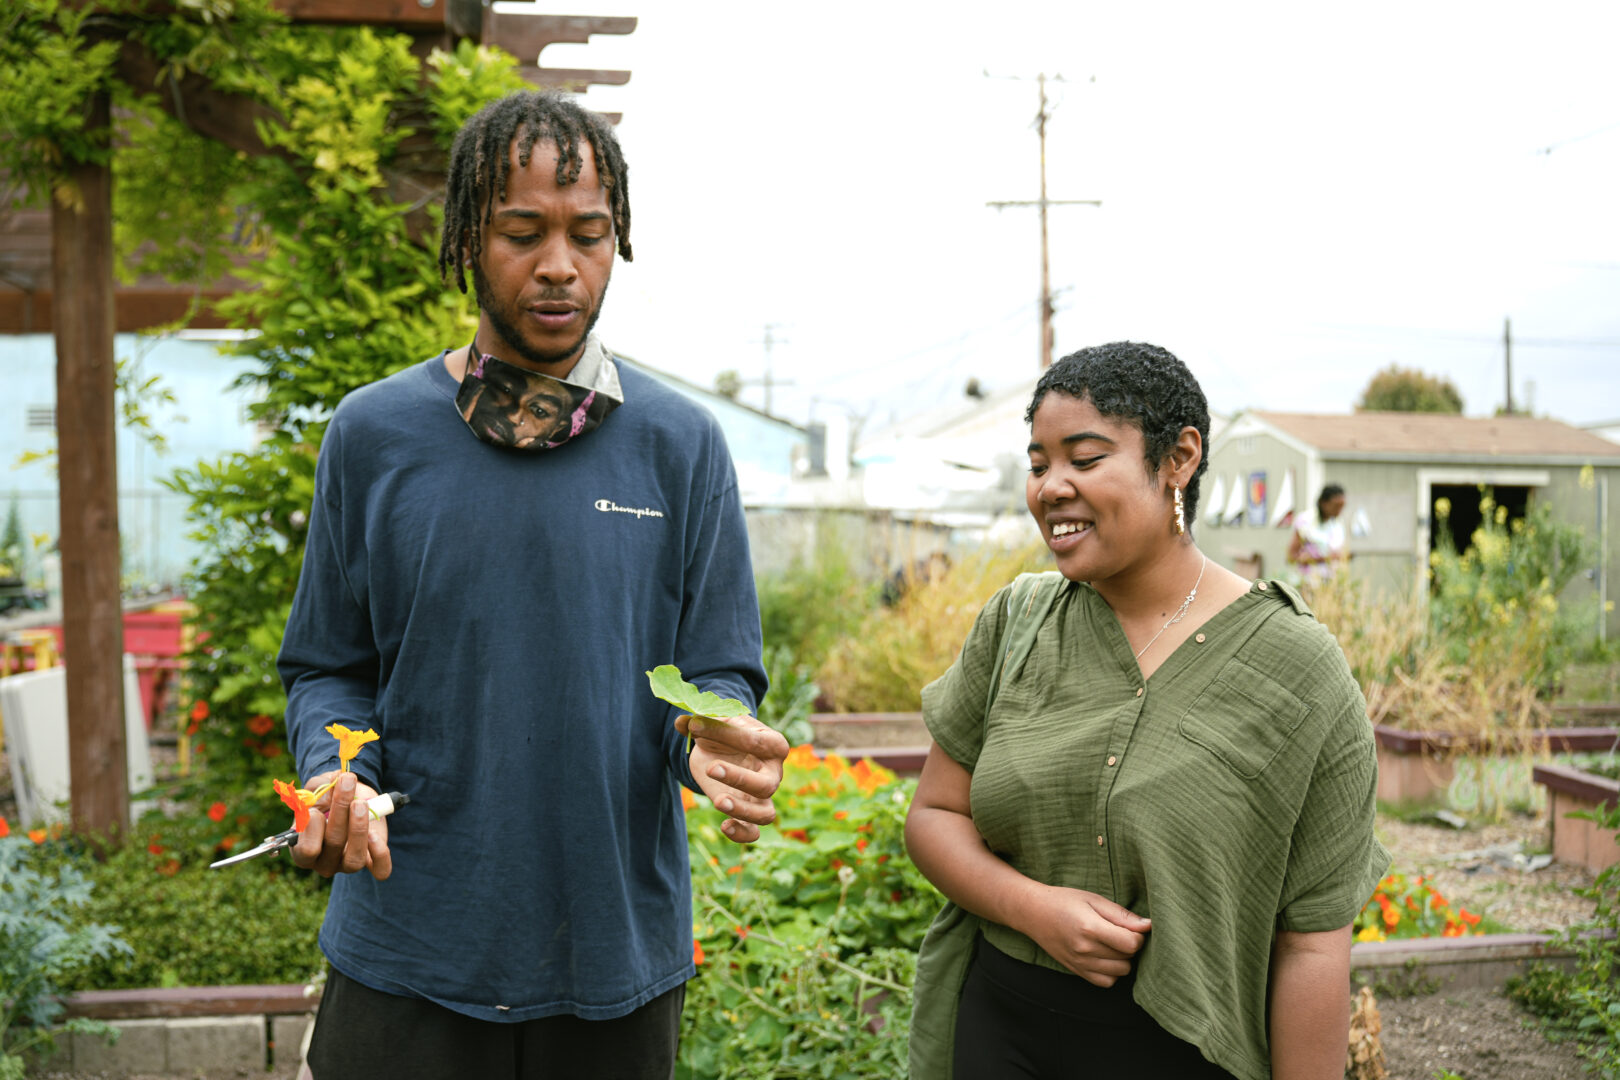 Two people at a garden speaking while holding plants. The man on the left is holding a yellow flower and a green plant. 